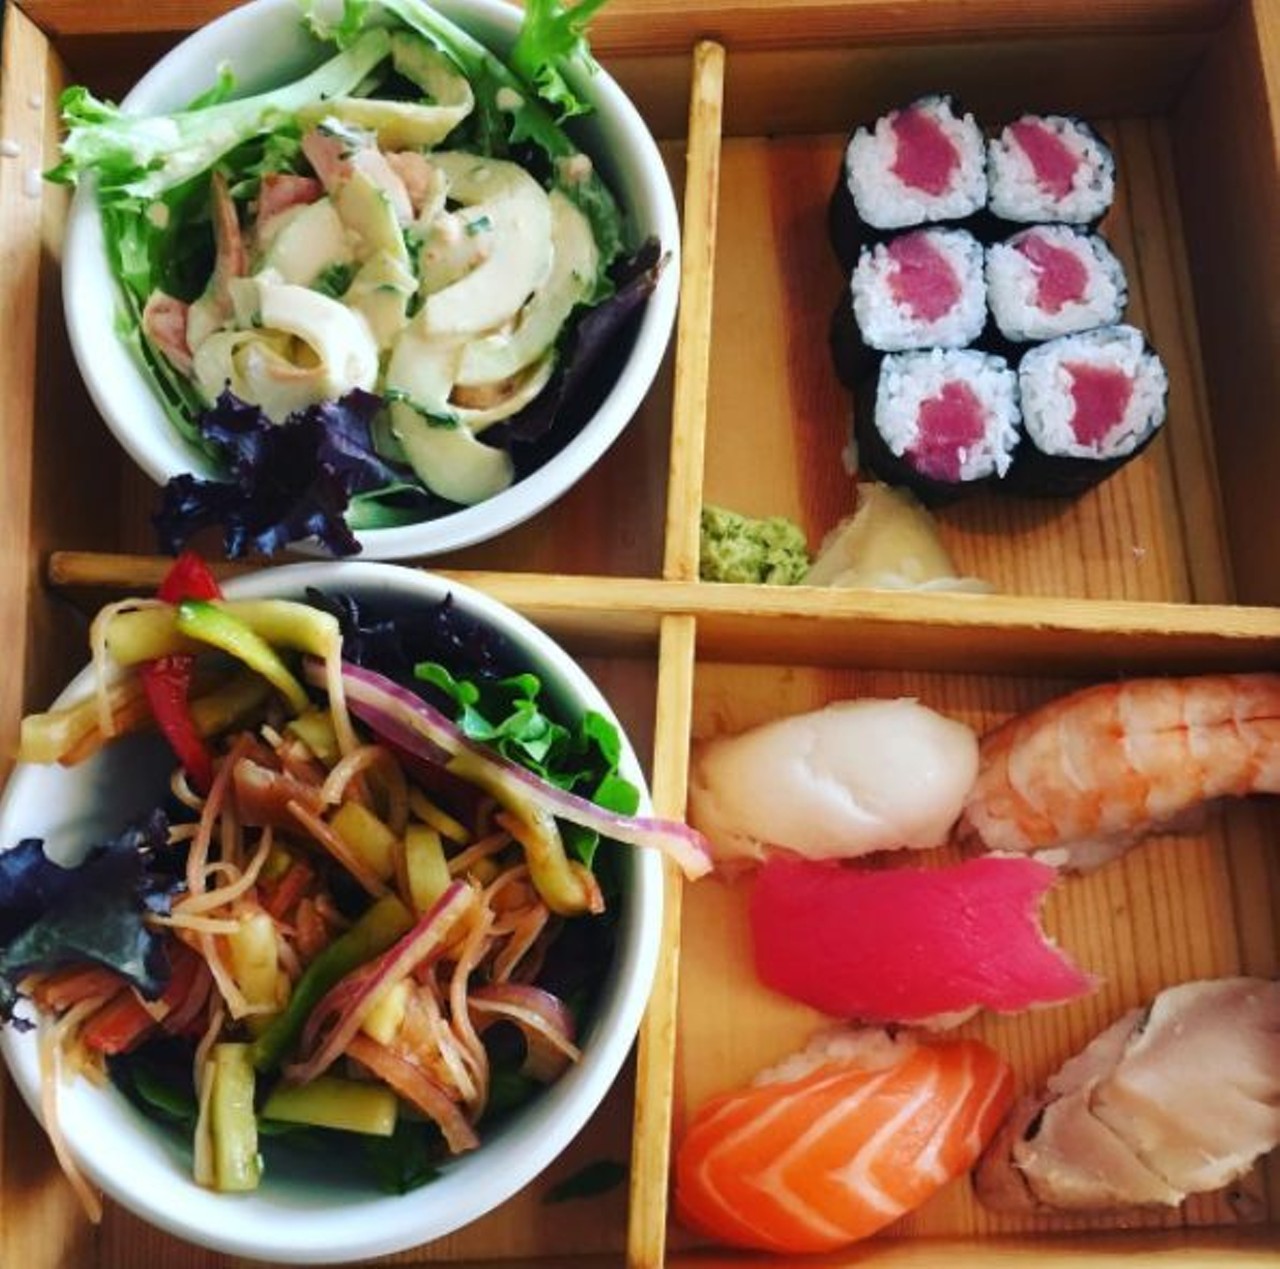 Piranha Killer Sushi
Quarry Village, 260 E Basse Rd #101, (210) 822-1088
Since opening its SA location in 2012, this sushi eatery has filled the temaki-shaped hole at the Quarry Village. 
Photo via Instagram, marissa_rod22</a